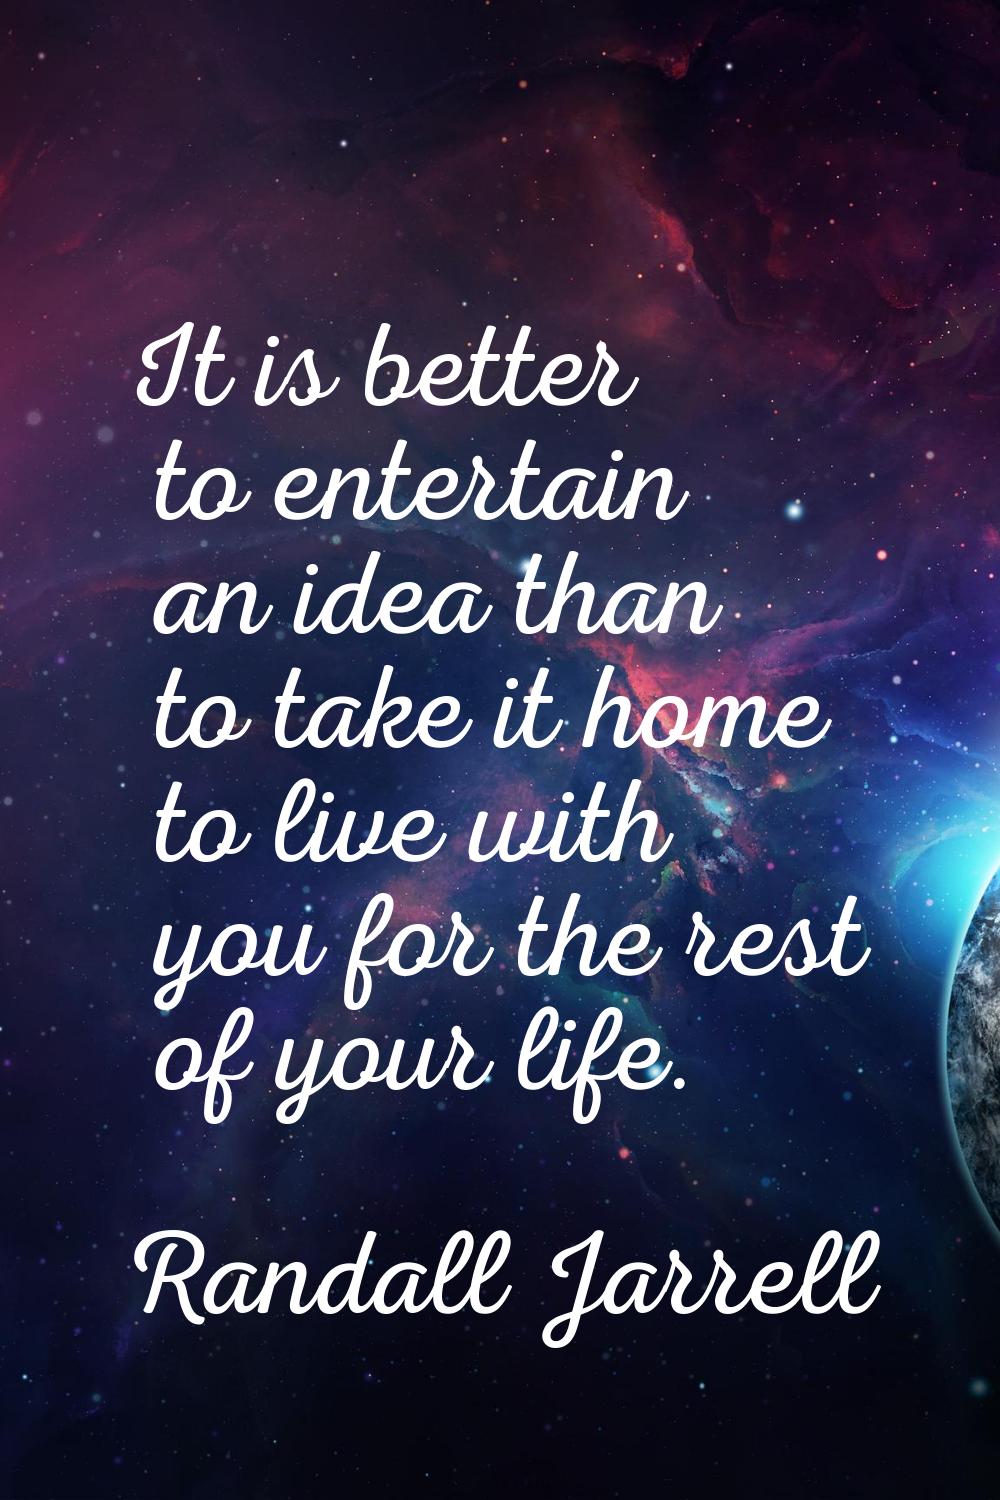 It is better to entertain an idea than to take it home to live with you for the rest of your life.